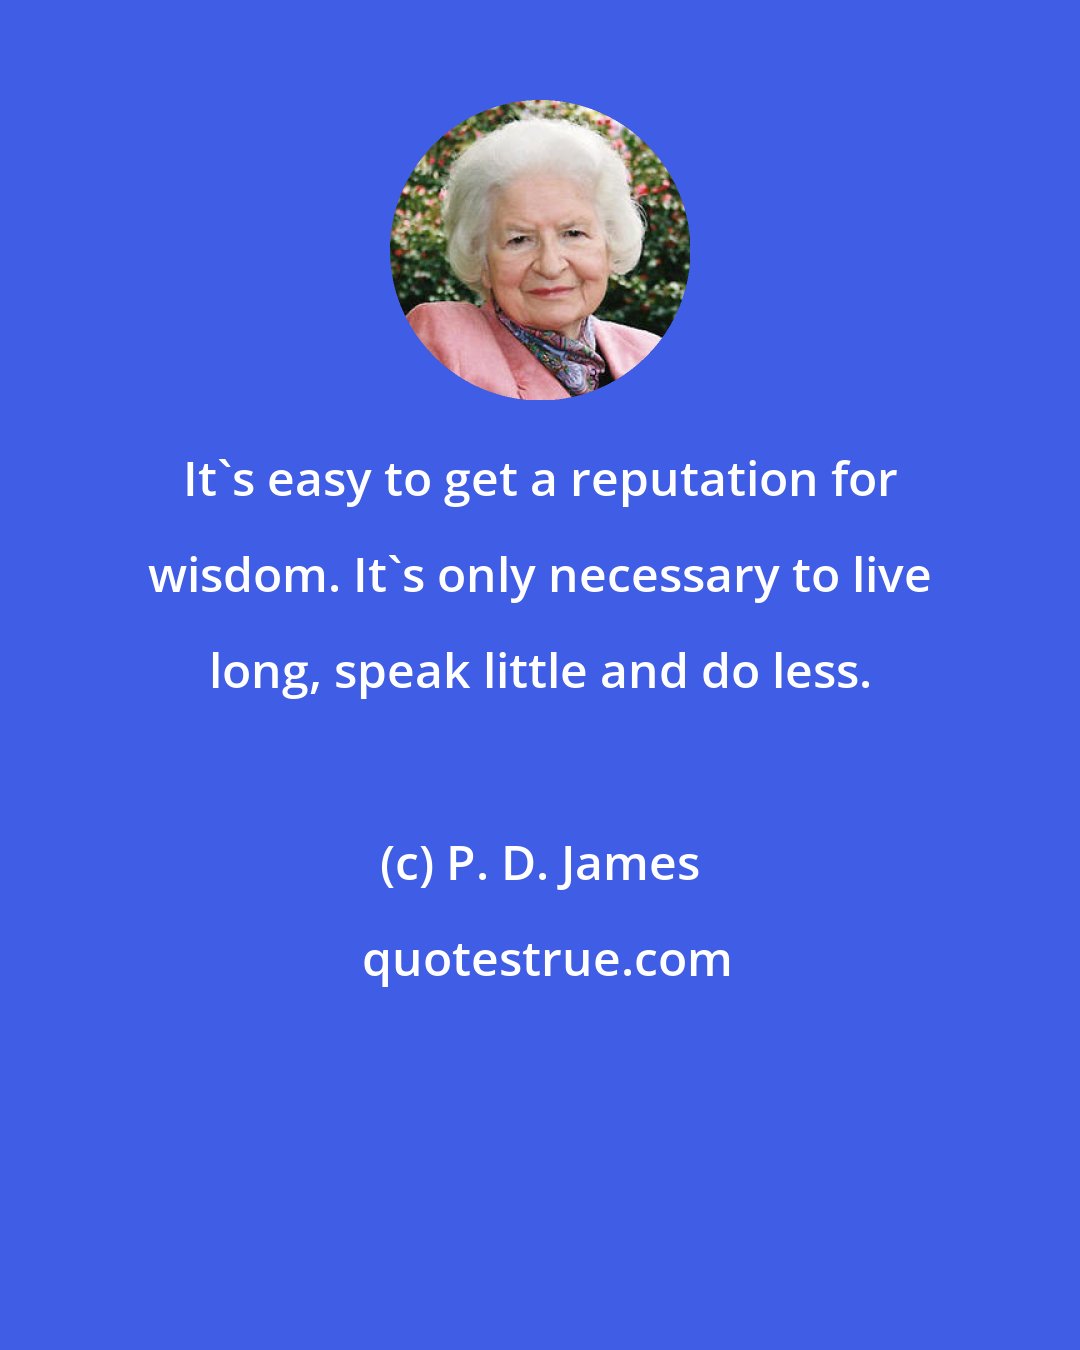 P. D. James: It's easy to get a reputation for wisdom. It's only necessary to live long, speak little and do less.